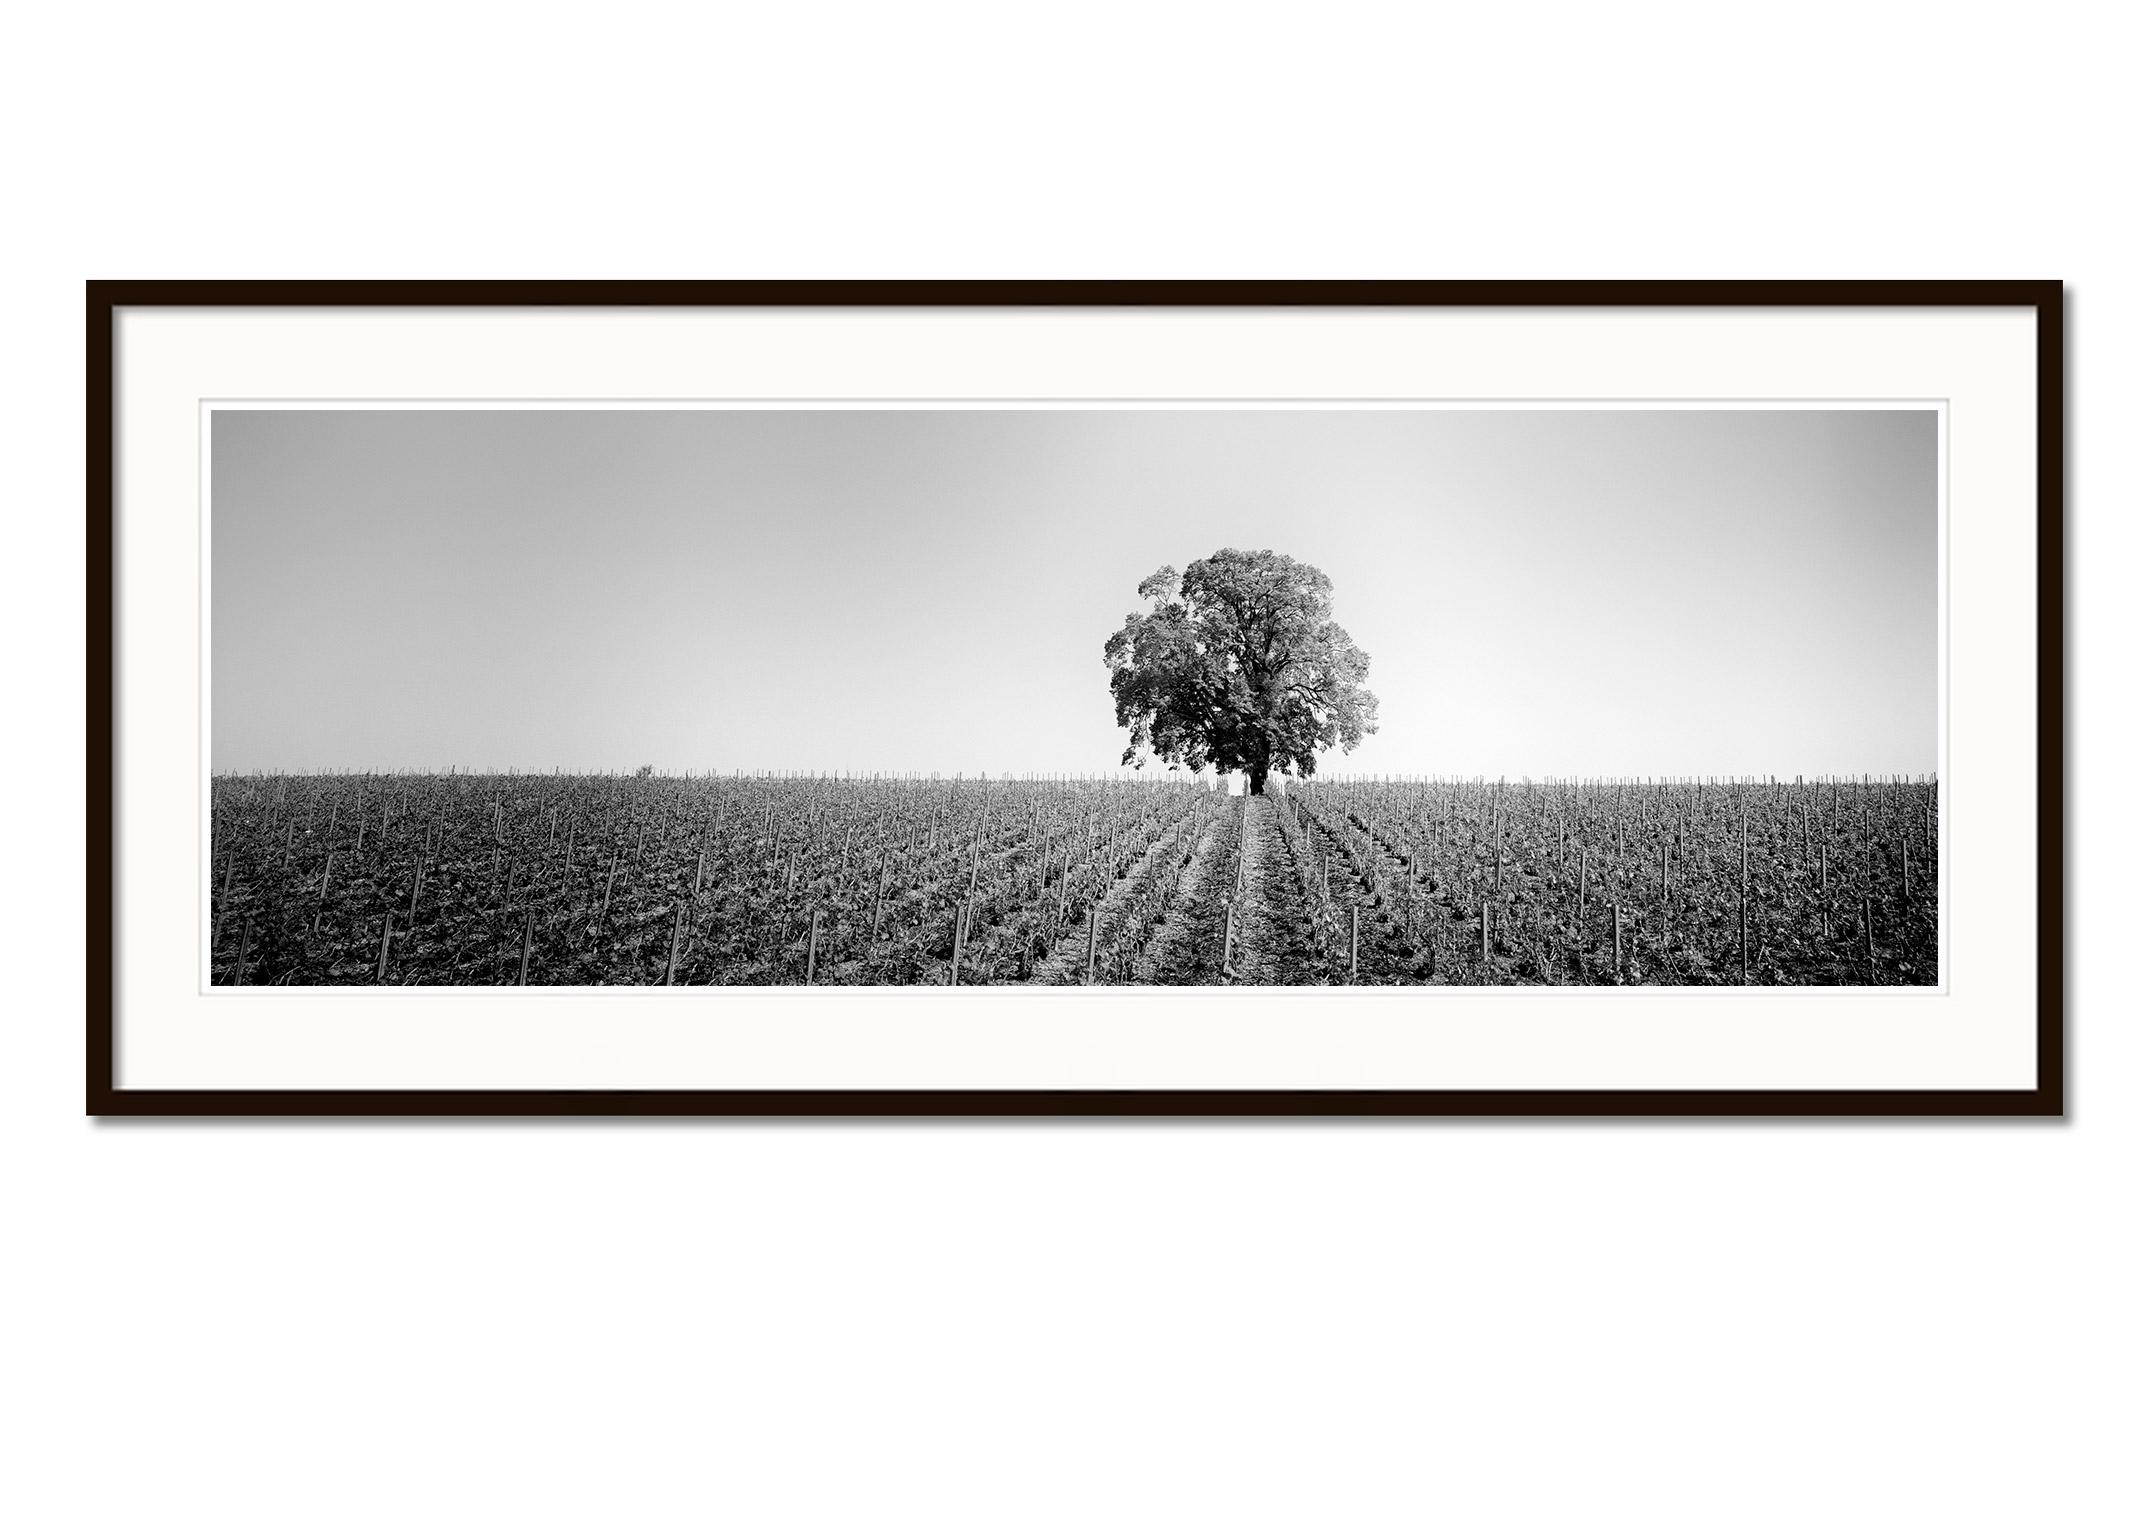 Black and white fine art panorama photography print - Romantic mood with a lonely tree on the vineyard, France. Archival pigment ink print, edition of 9. Signed, titled, dated and numbered by artist. Certificate of authenticity included. Printed